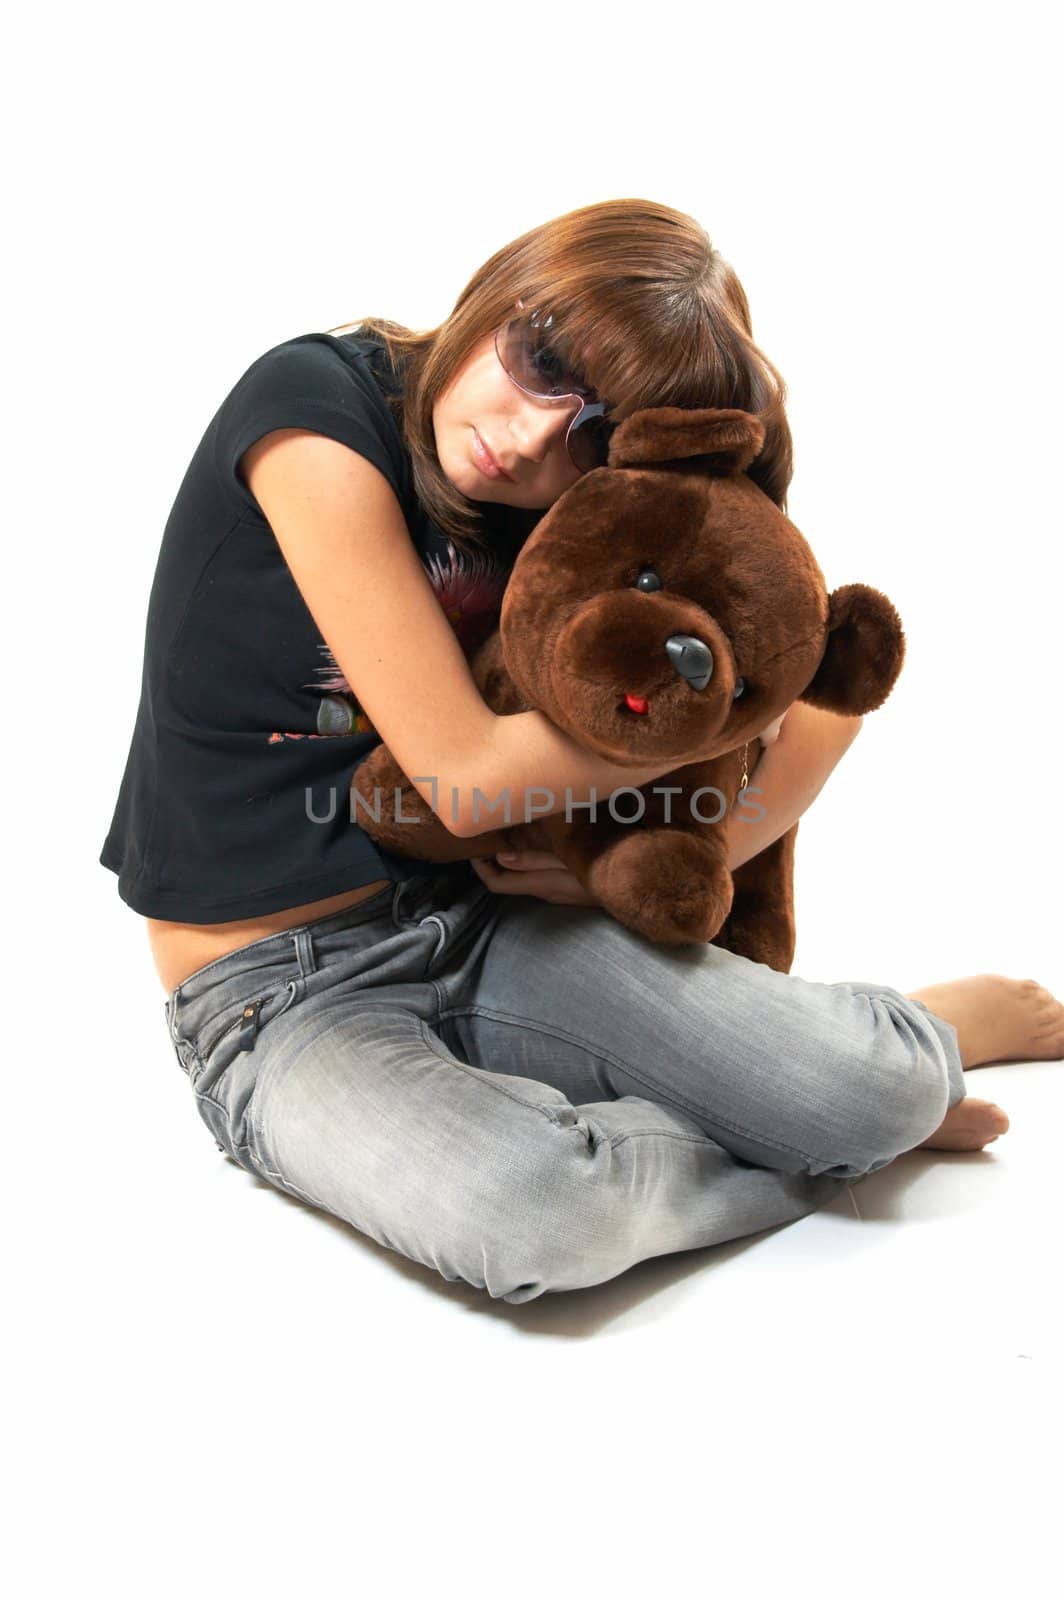 girl with the teddy bear by holligan78